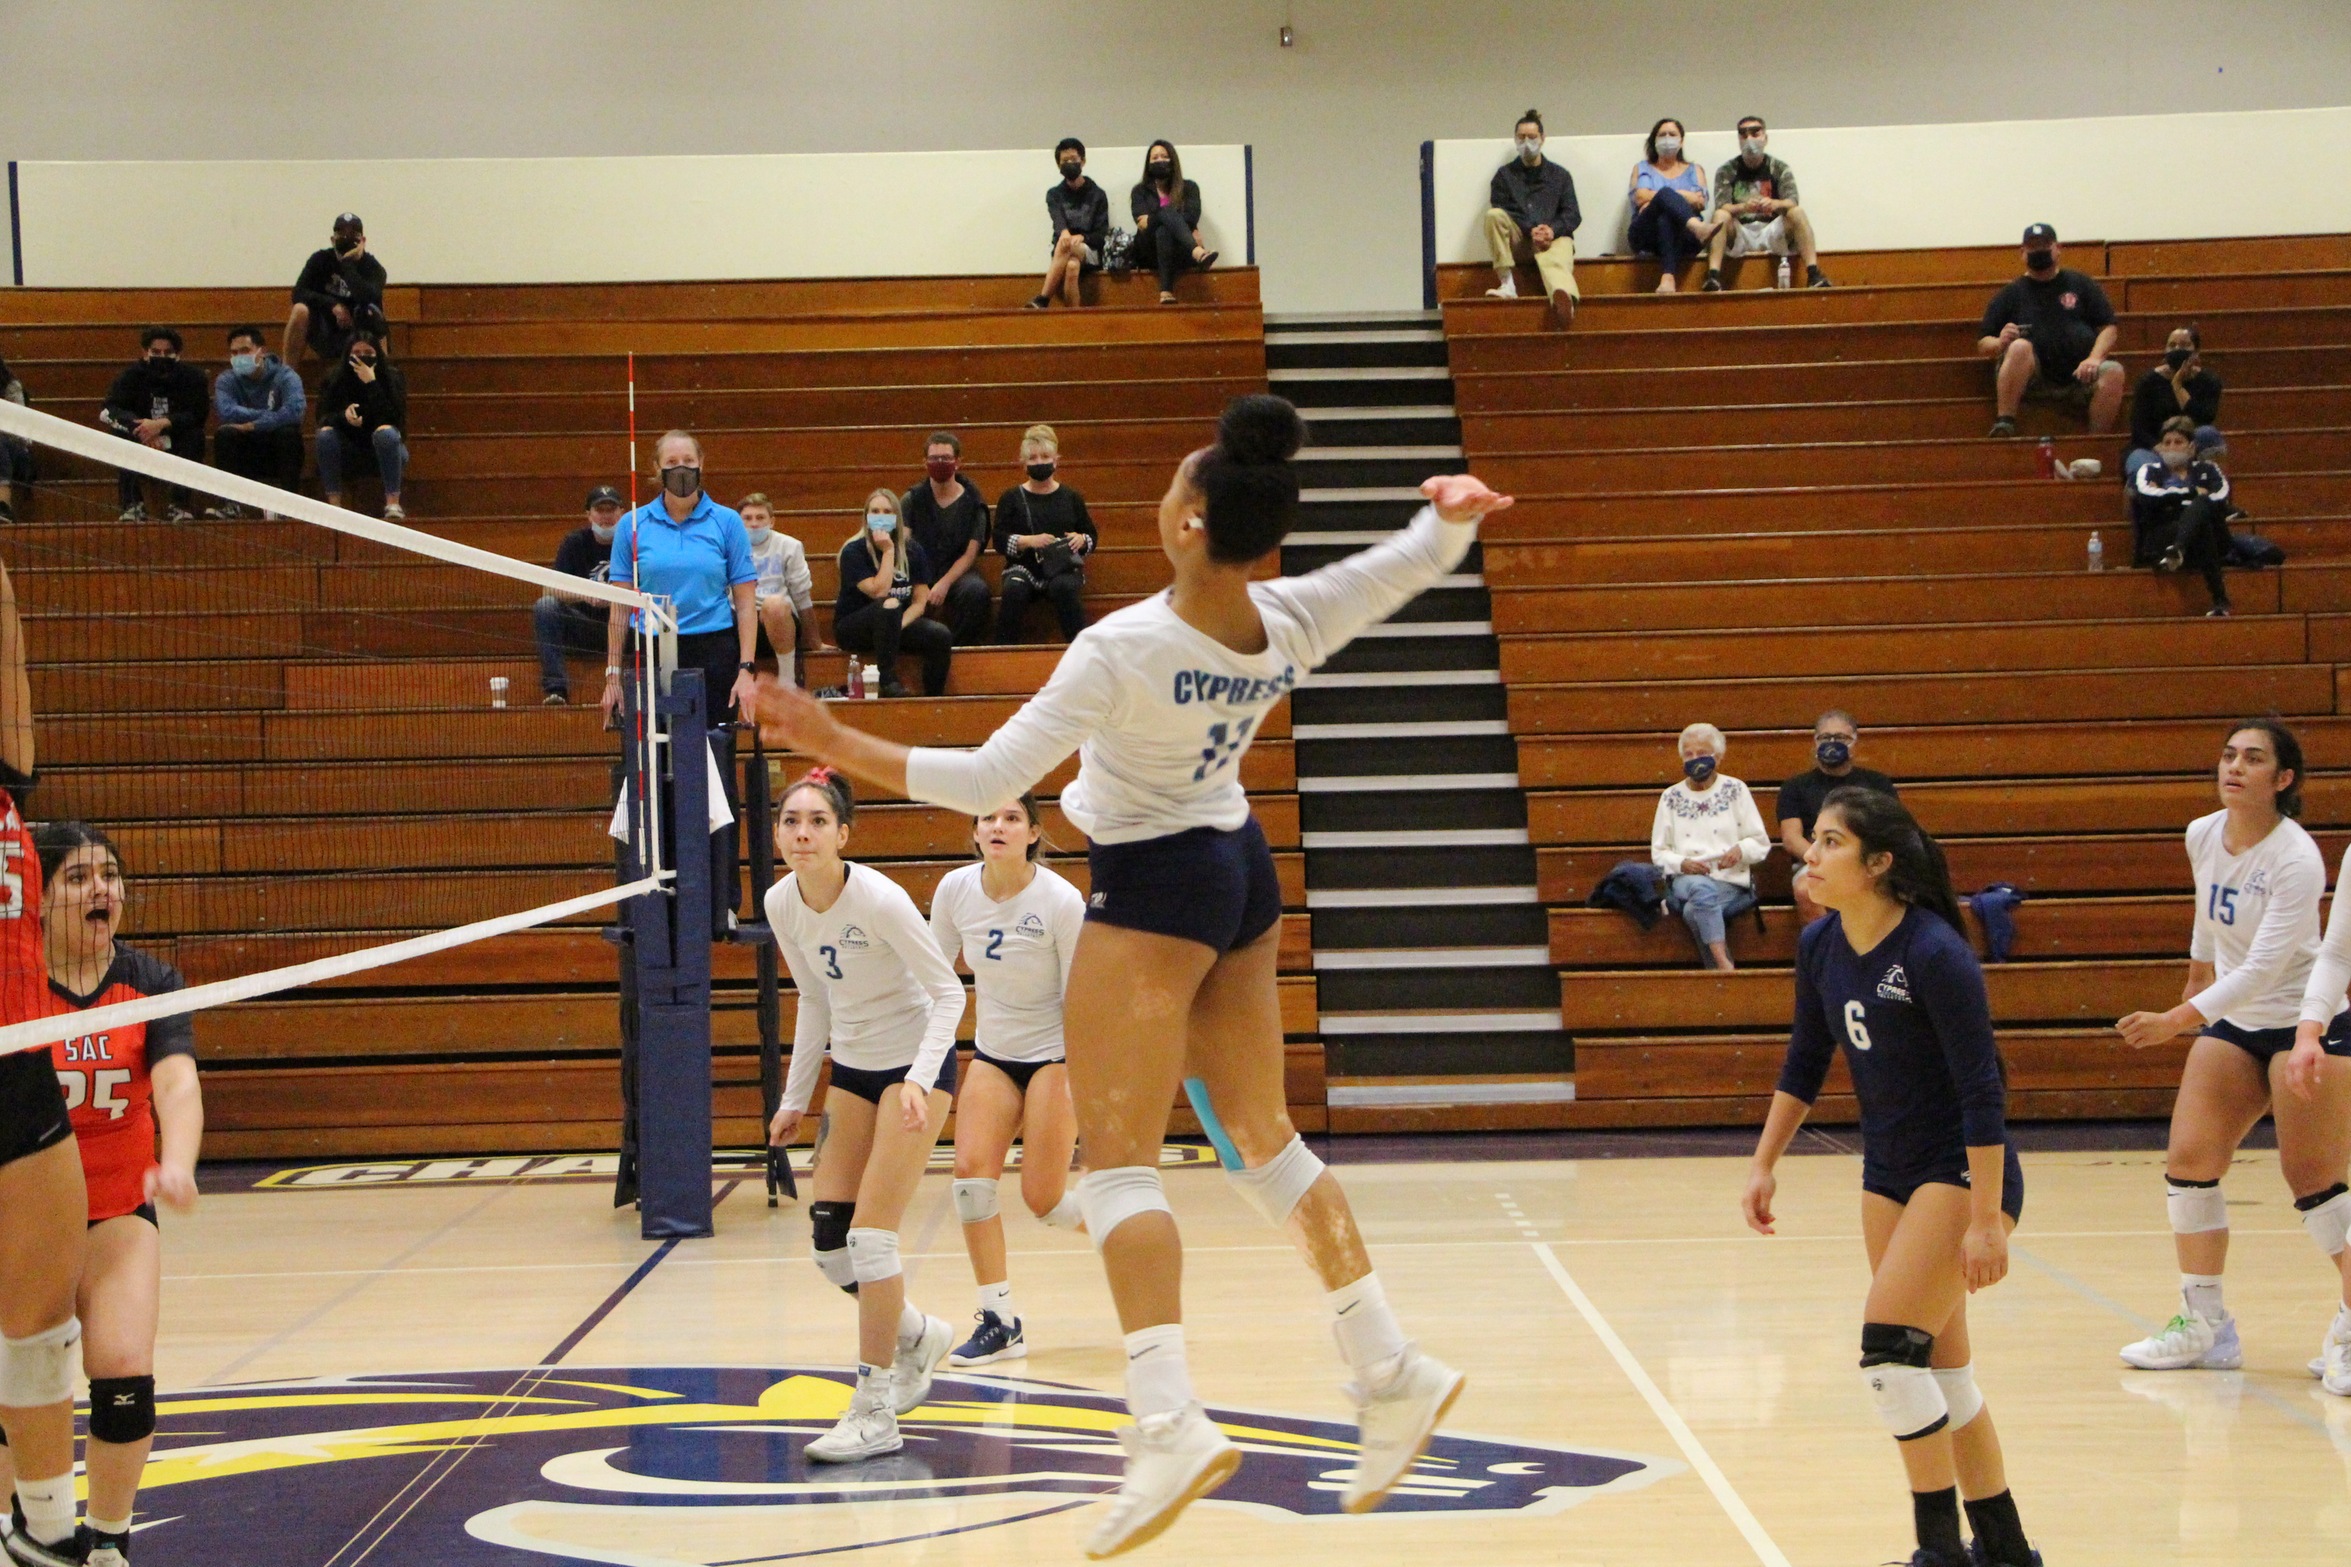 Chargers Remain Undefeated at Home with Victory over Santa Ana